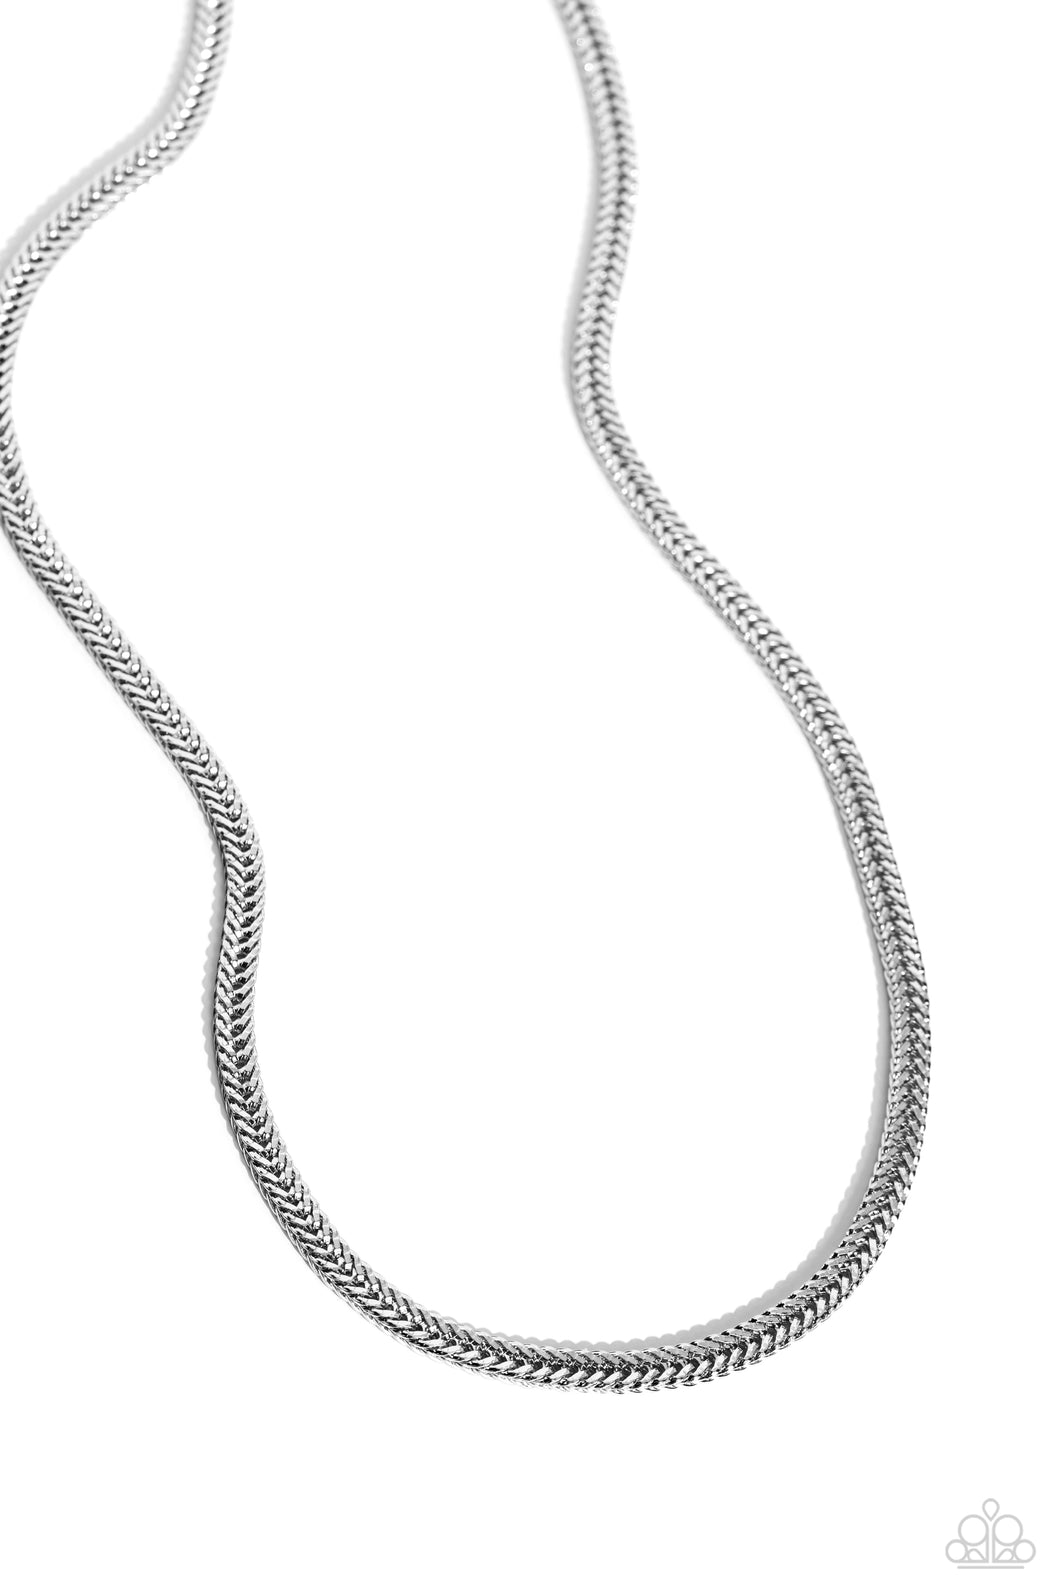 Downtown Defender - Silver Necklace